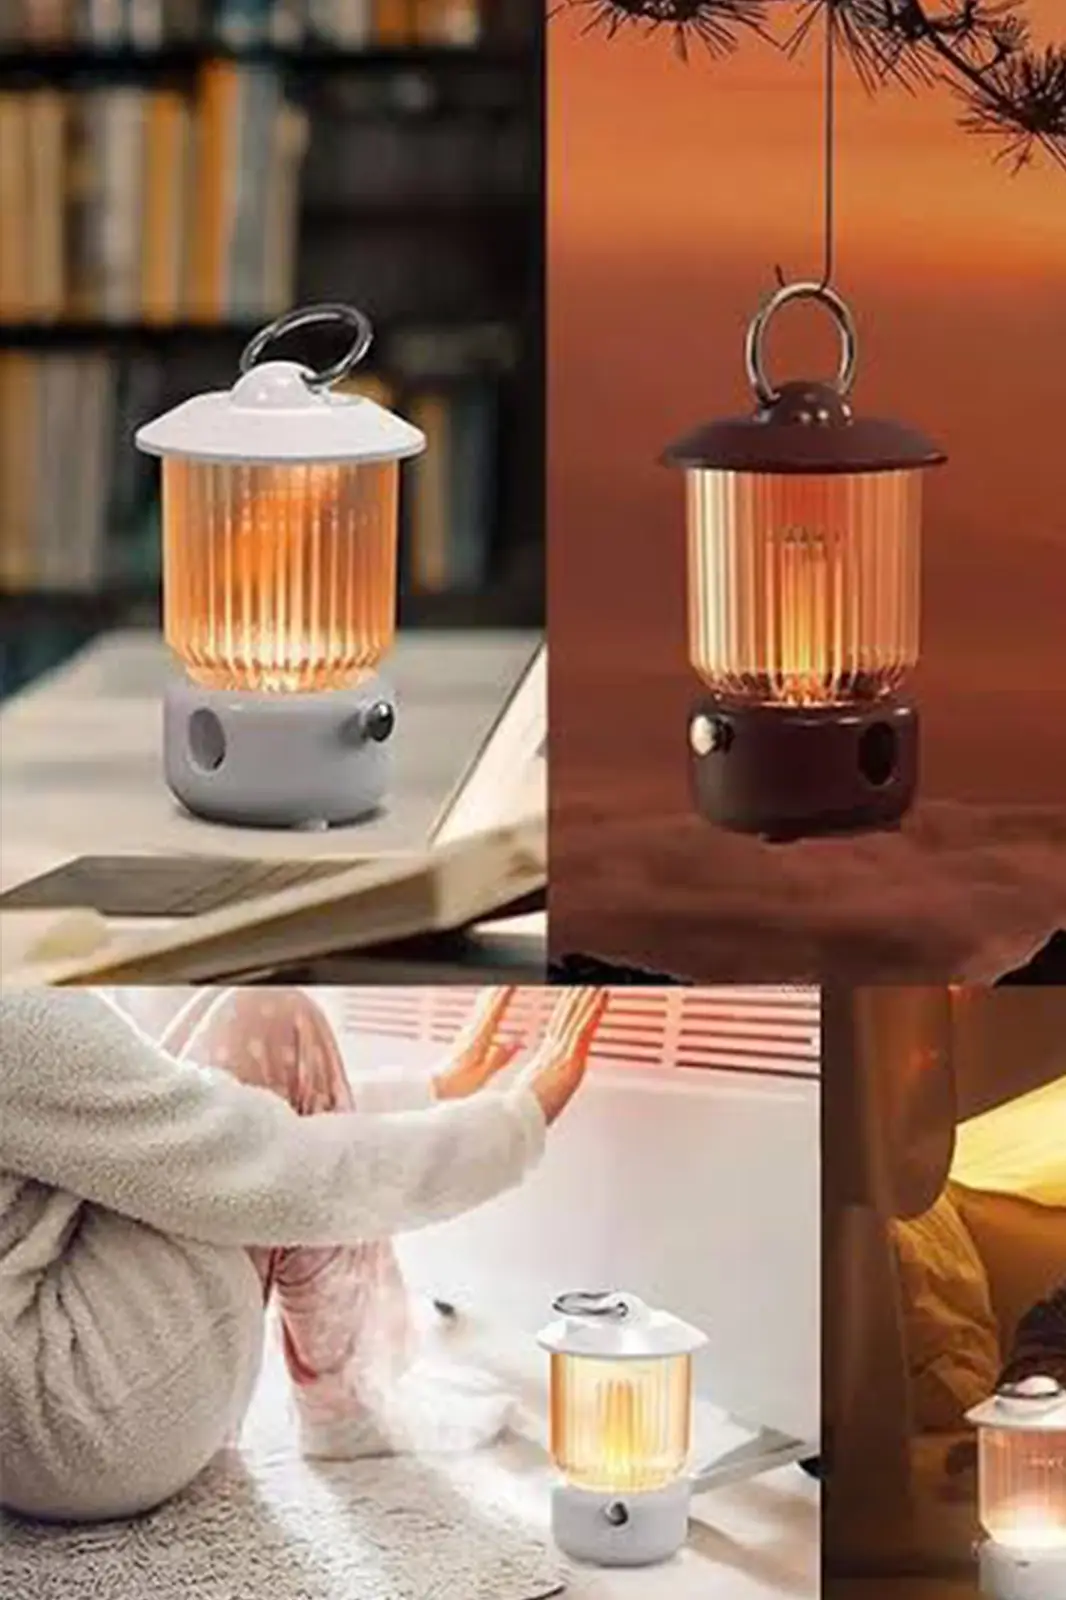 Aroma lamp diffuser, aromatic lamp diffuser, aroma diffuser machine, essential oil lamp diffuser, electric diffuser, aroma diffuser for home, fragrance for home, aromatic products, aromatherapy, diffuser for room, electric aroma diffuser for home, home diffuser, electric fragrance diffuser, diffuser for bathroom